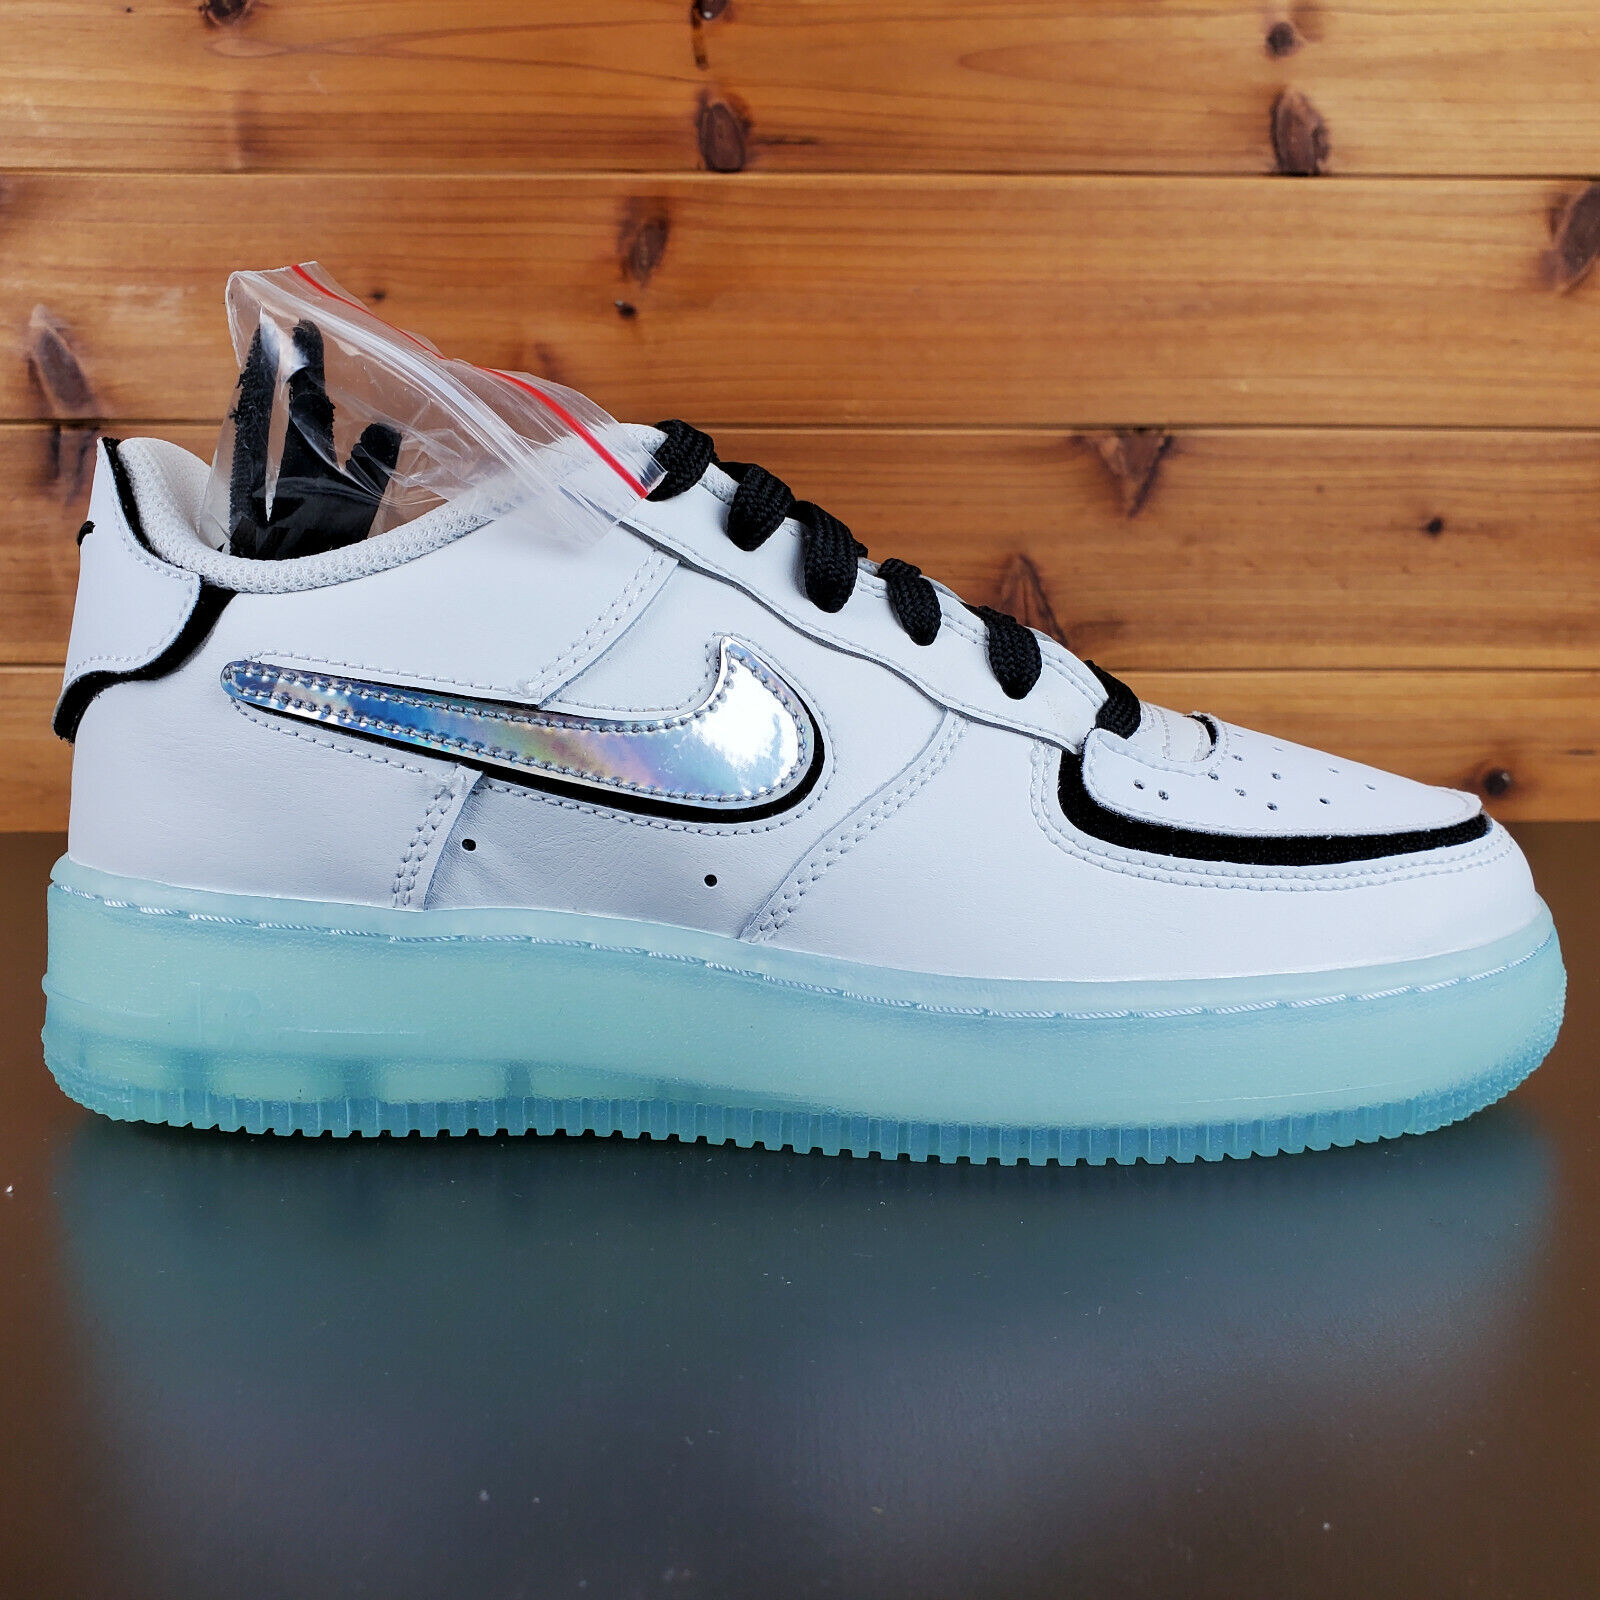 Nike AF1/1 Mix Air Force 1 Inspired By Music White DH7341-100 Sz 